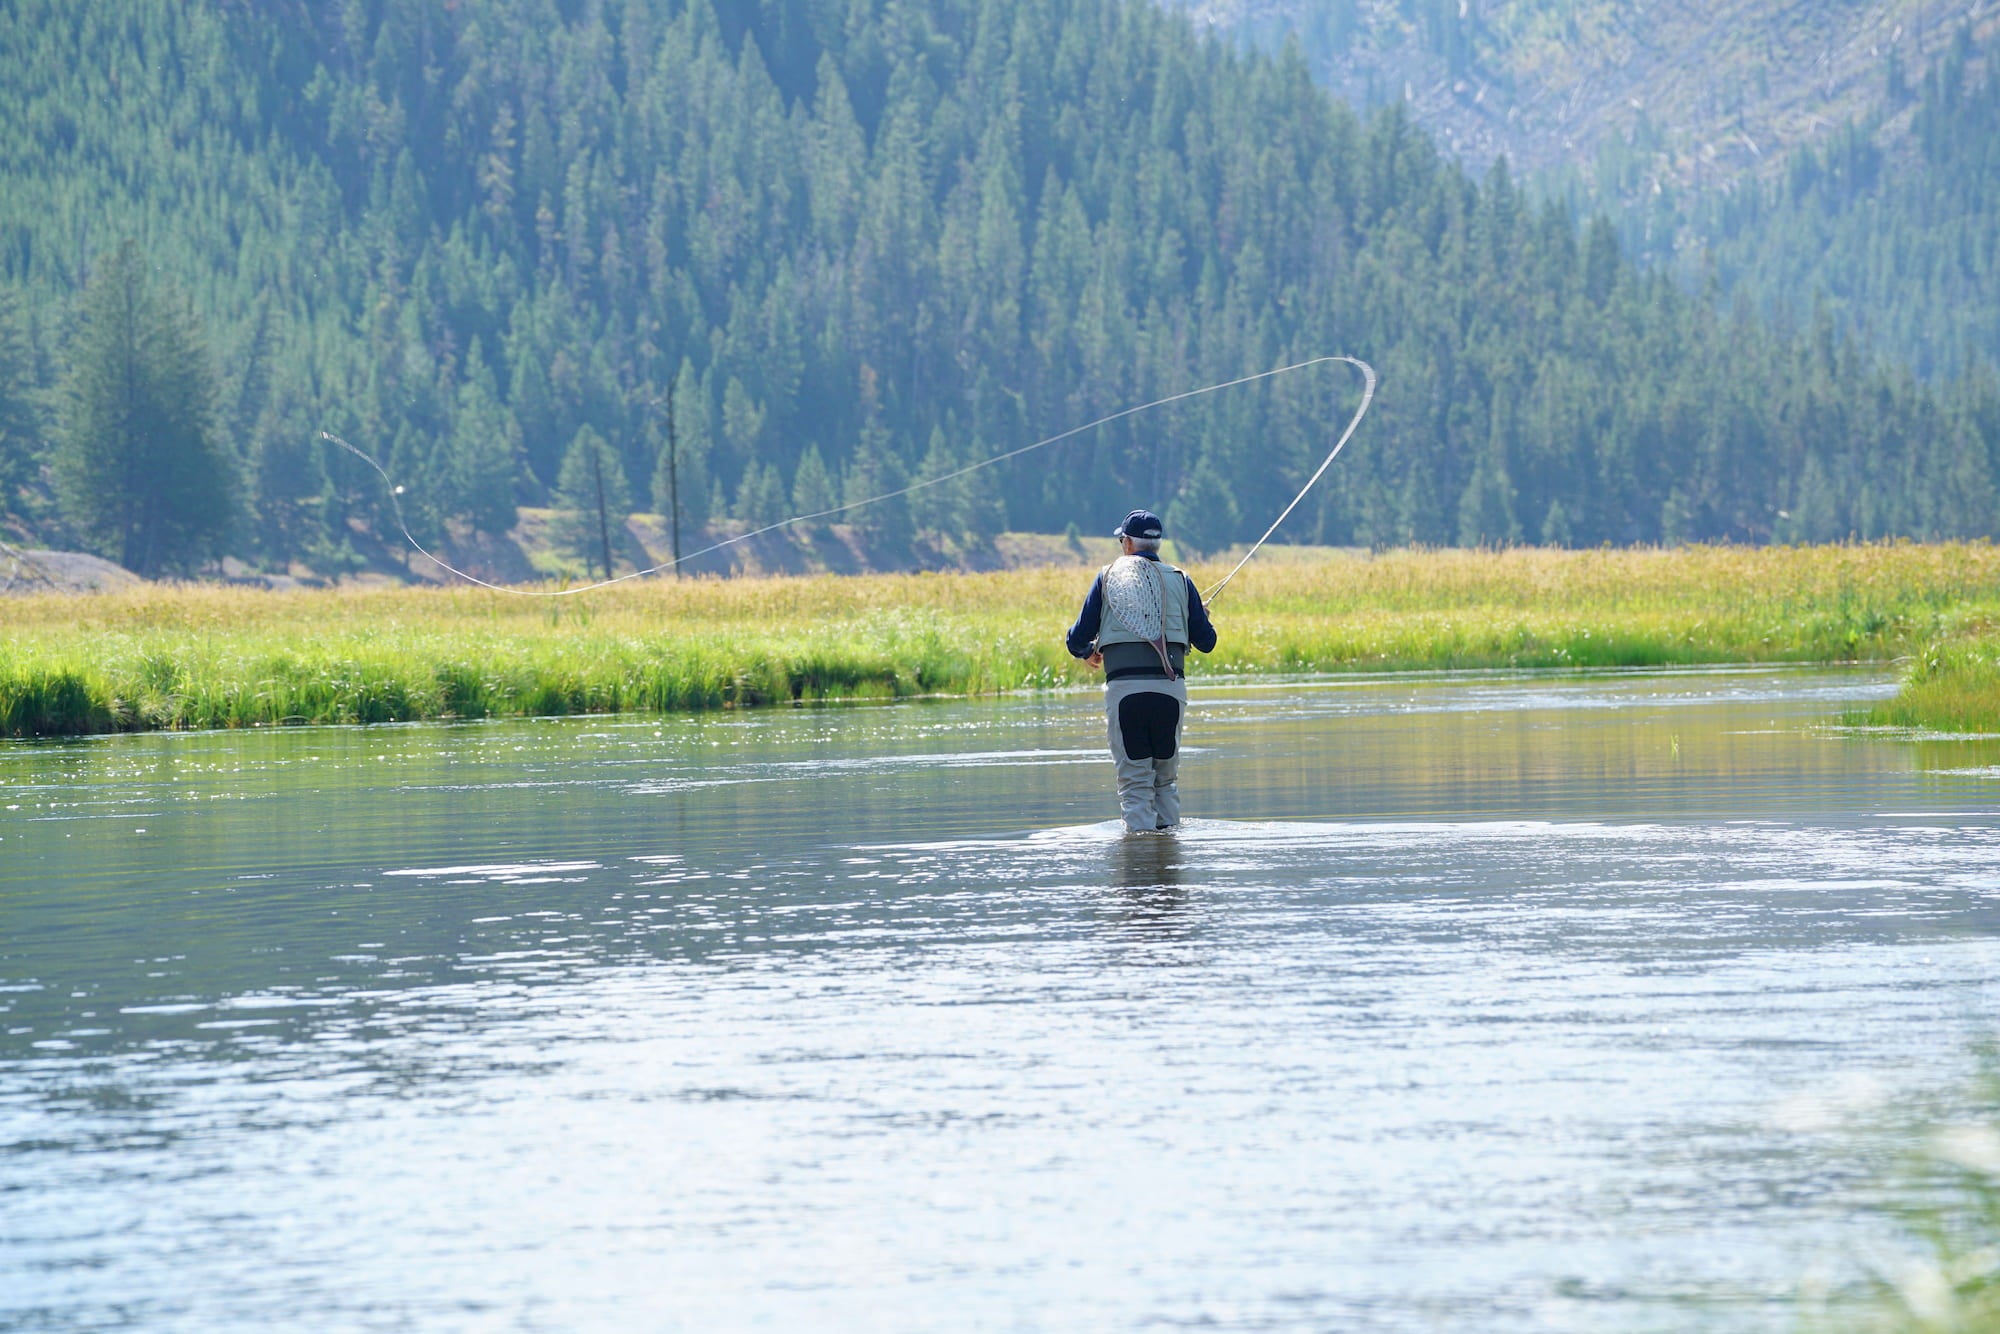 Man fly fishing on river in Wyoming